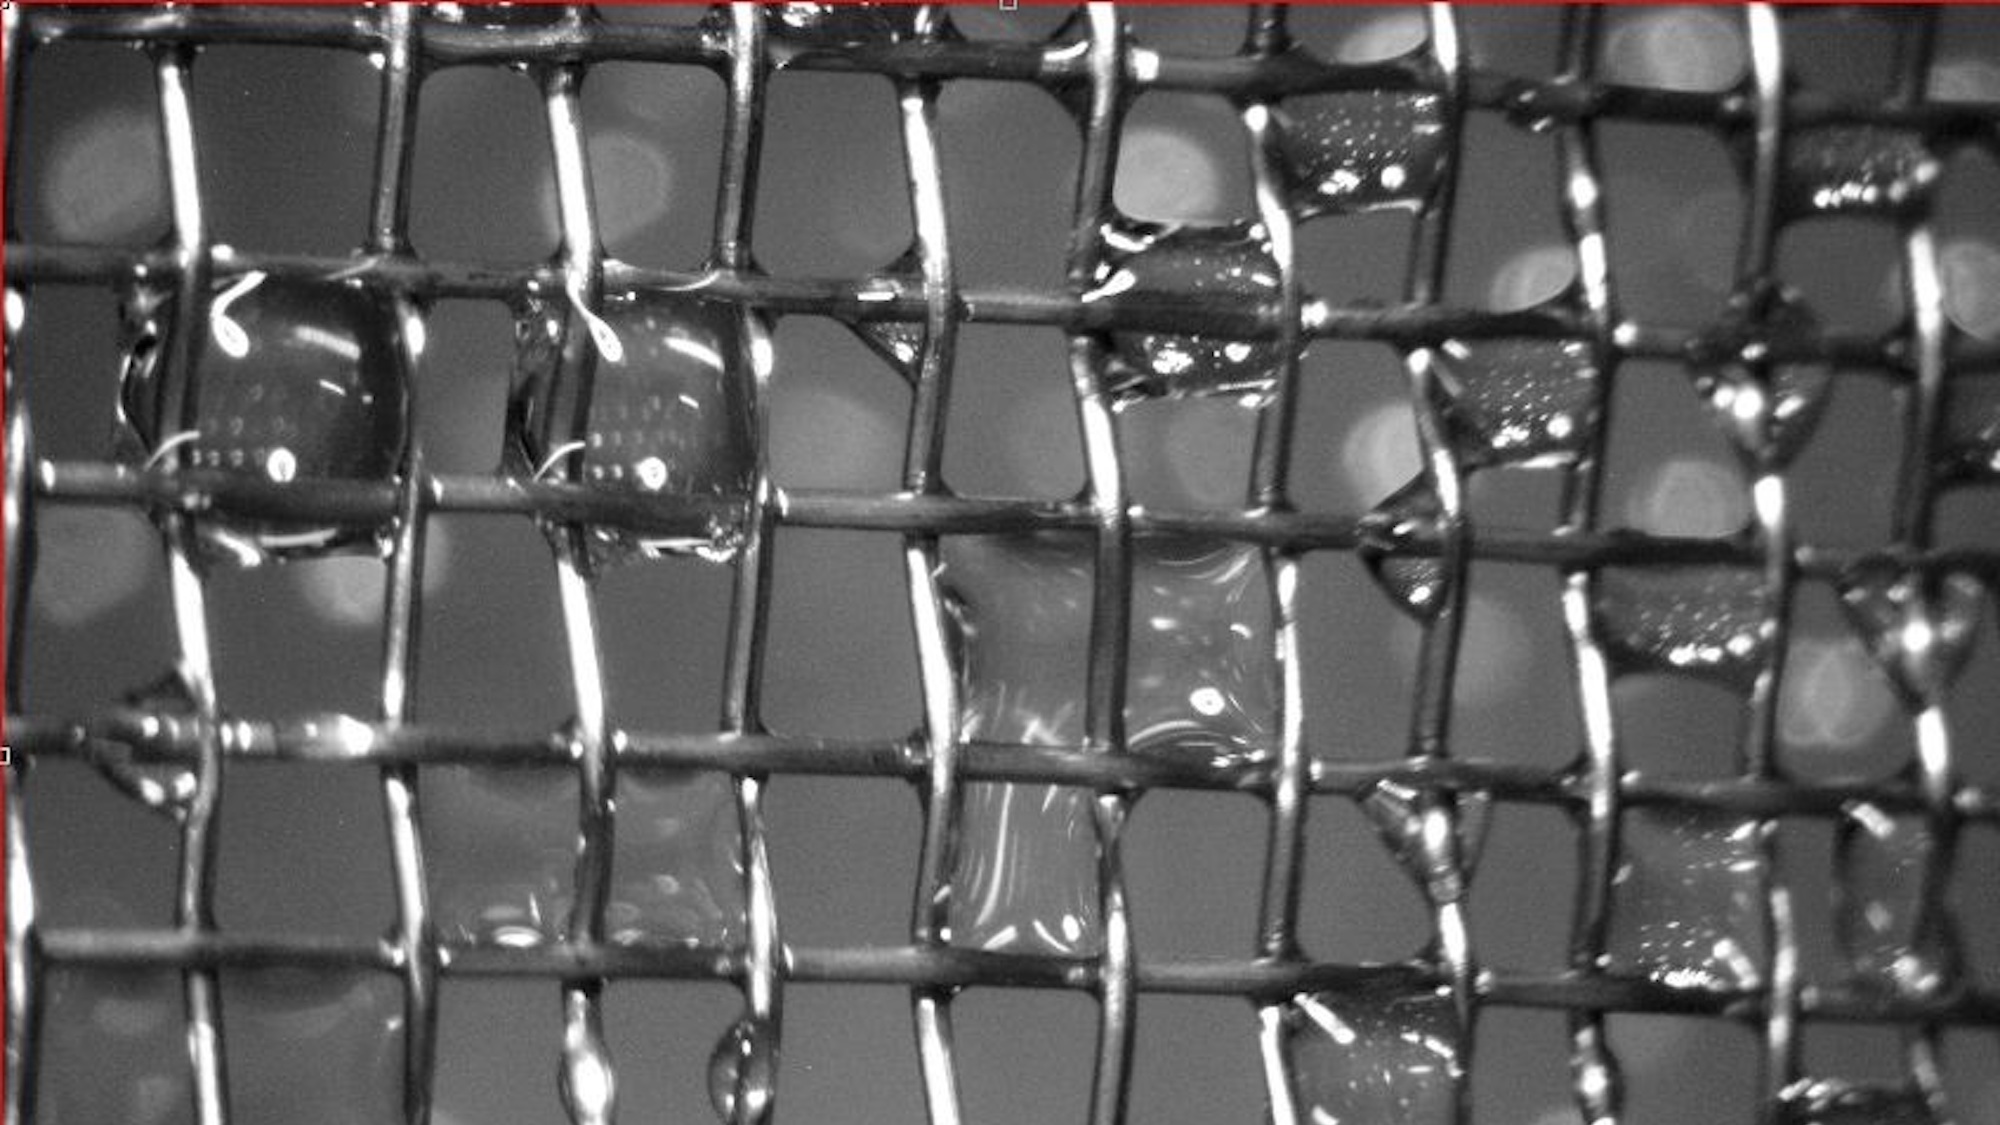 Metal mesh with water droplets